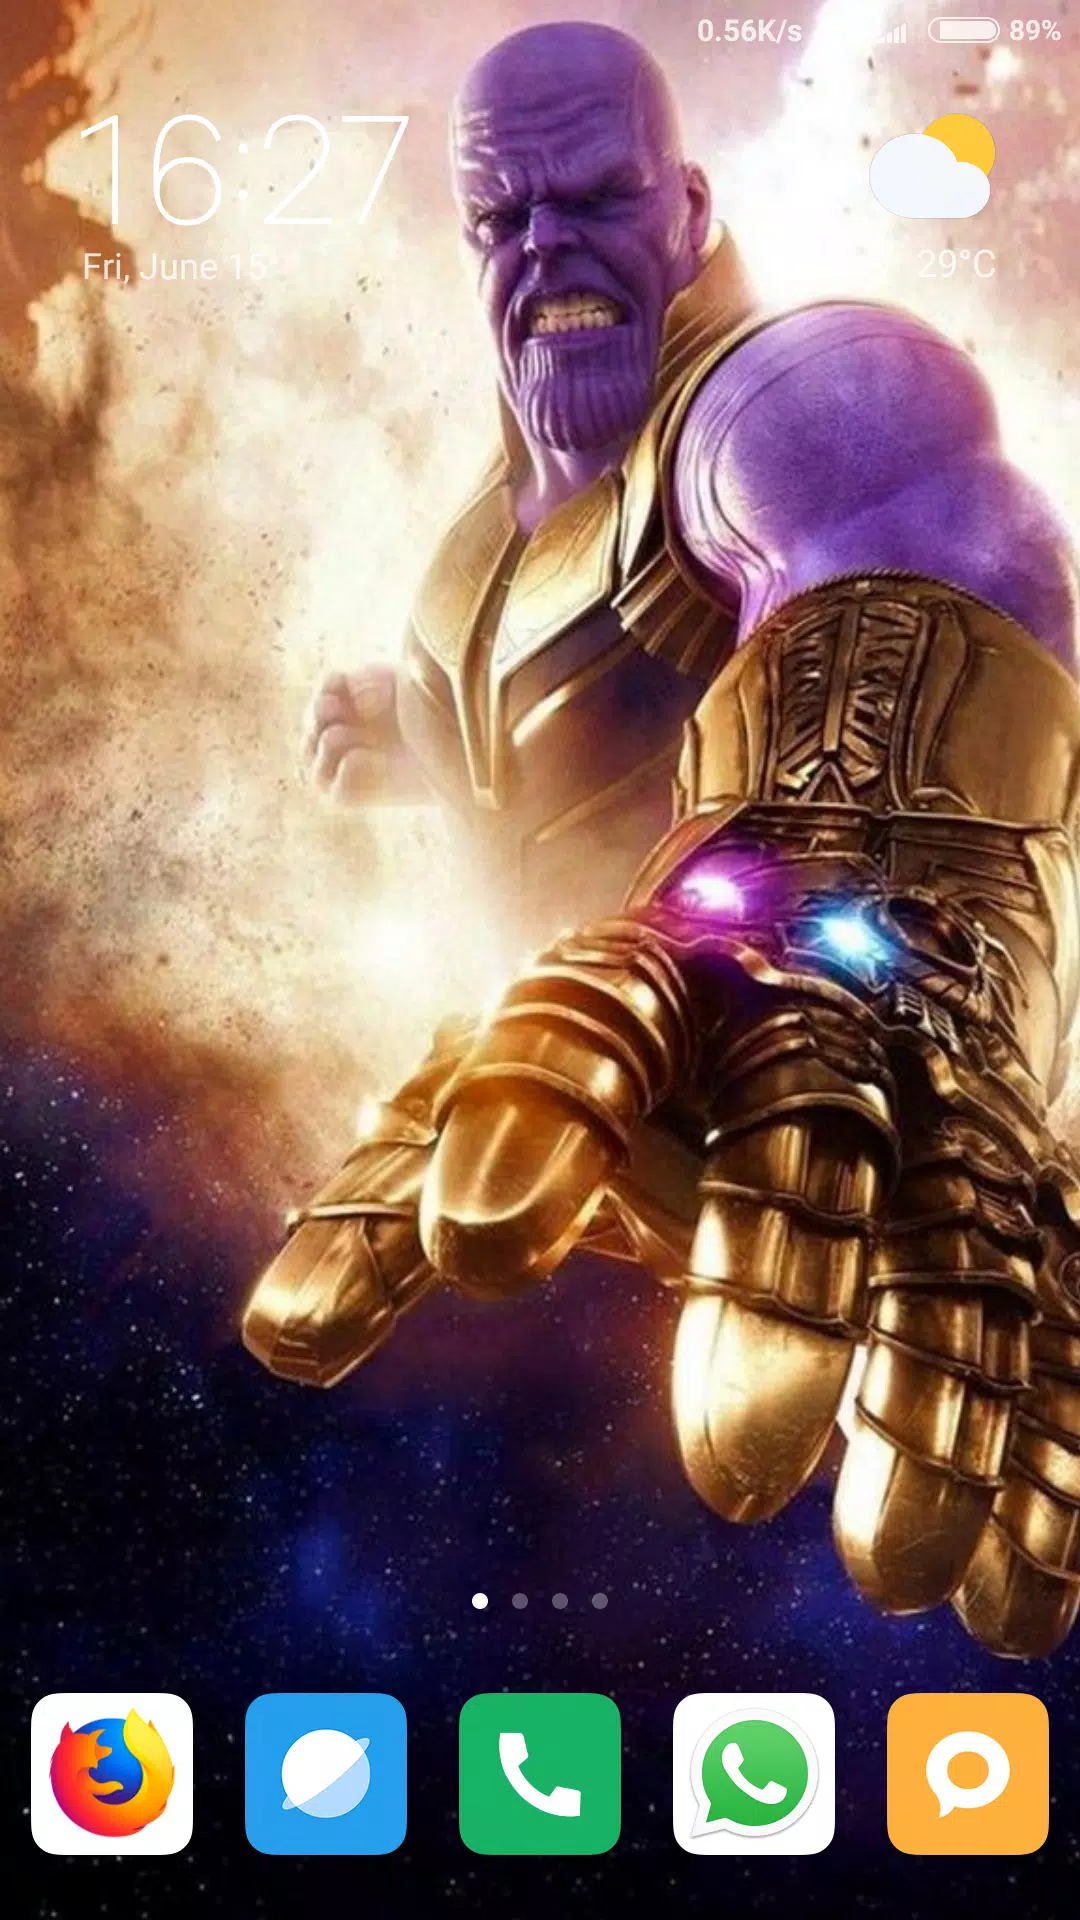 Tải xuống APK Thanos Wallpapers cho Android